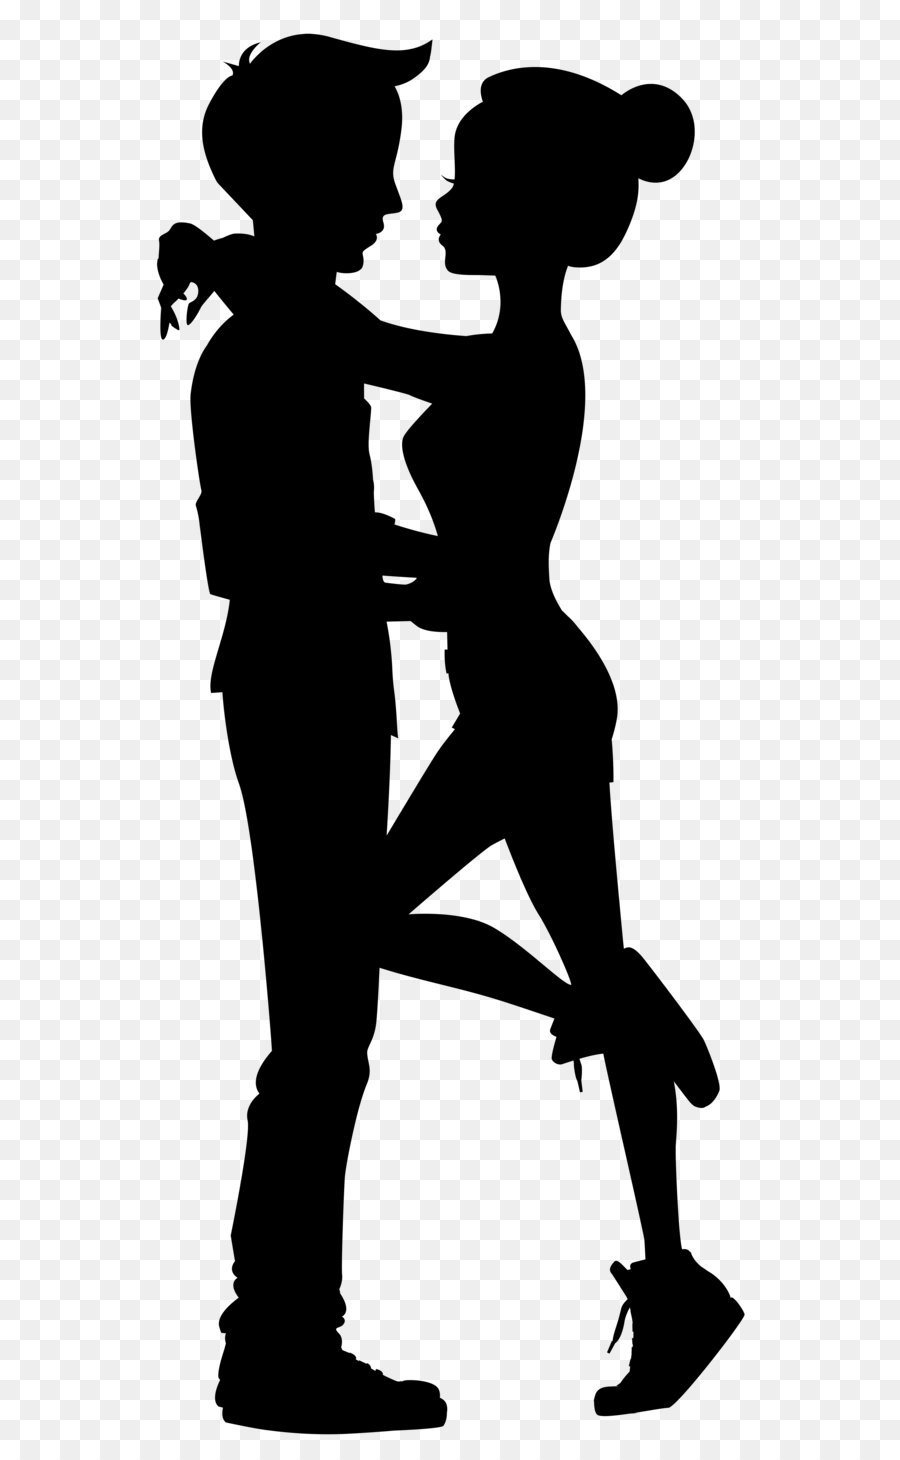 Silhouette Drawing Clip art - Cute Couple Silhouettes Clip Art Image png download - 3566*8000 - Free Transparent Silhouette png Download.